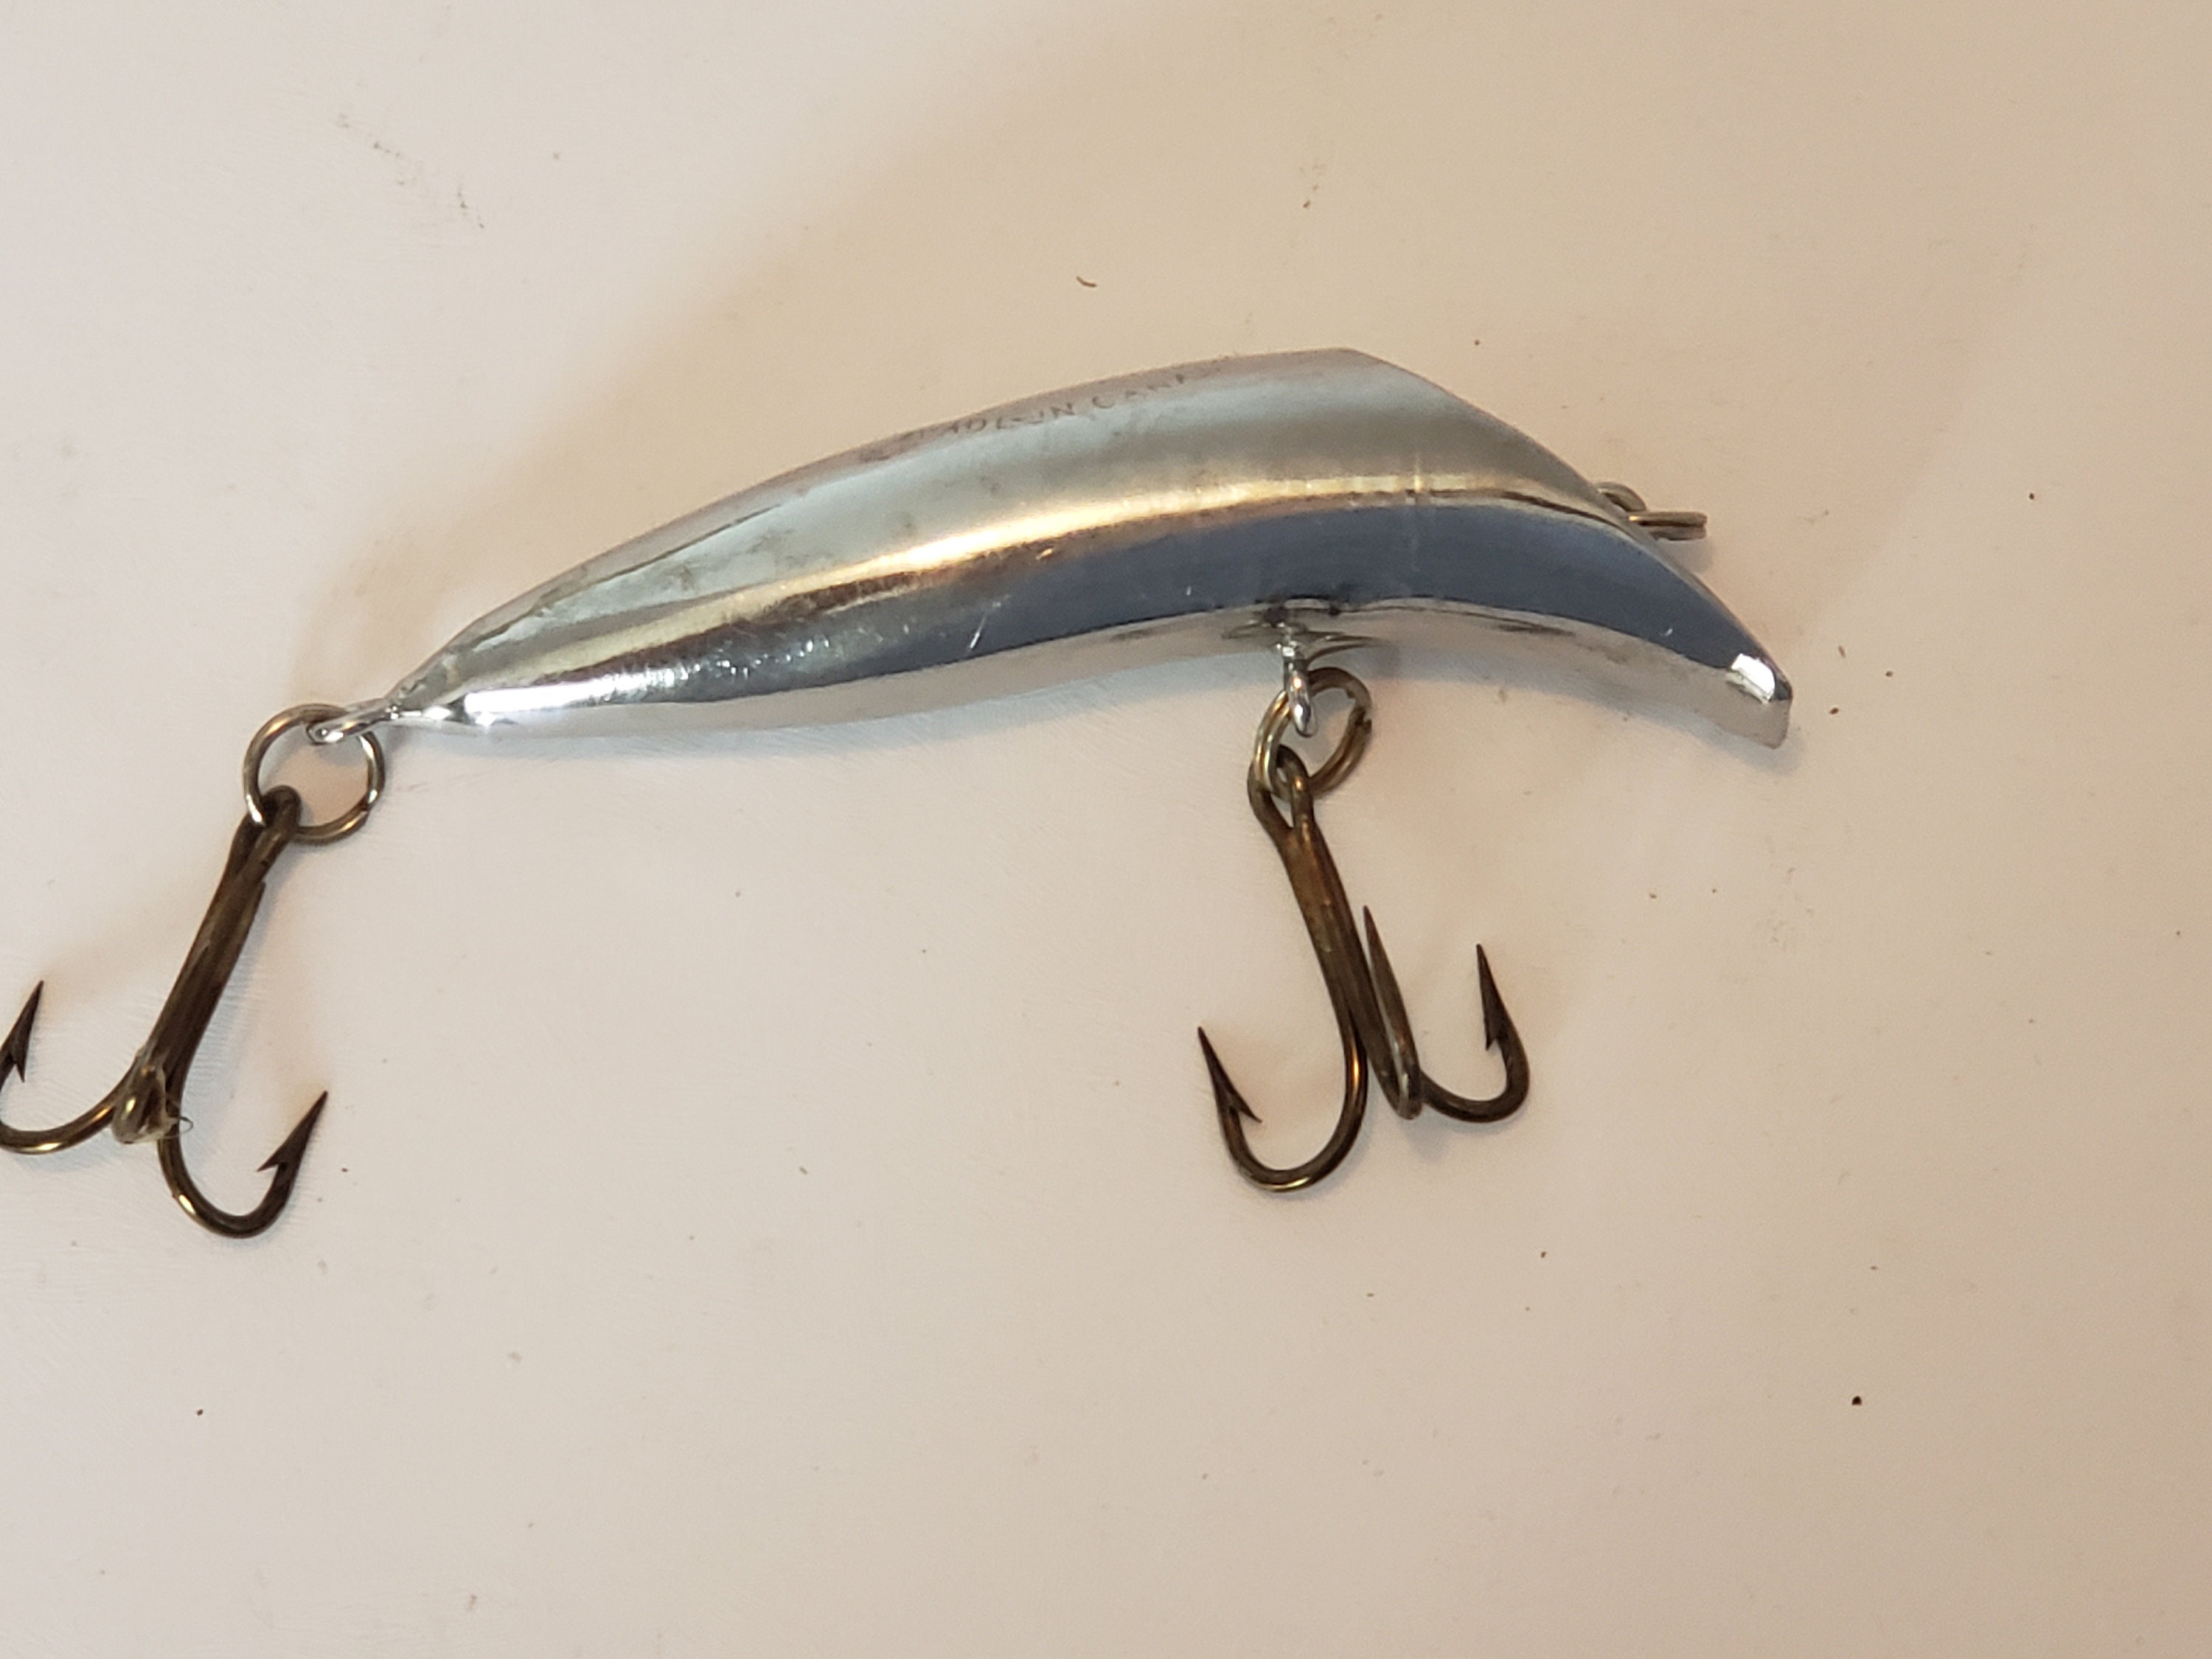 Canadian Wiggler Trolling Size No M2 Fishing Lure, Made of Brass